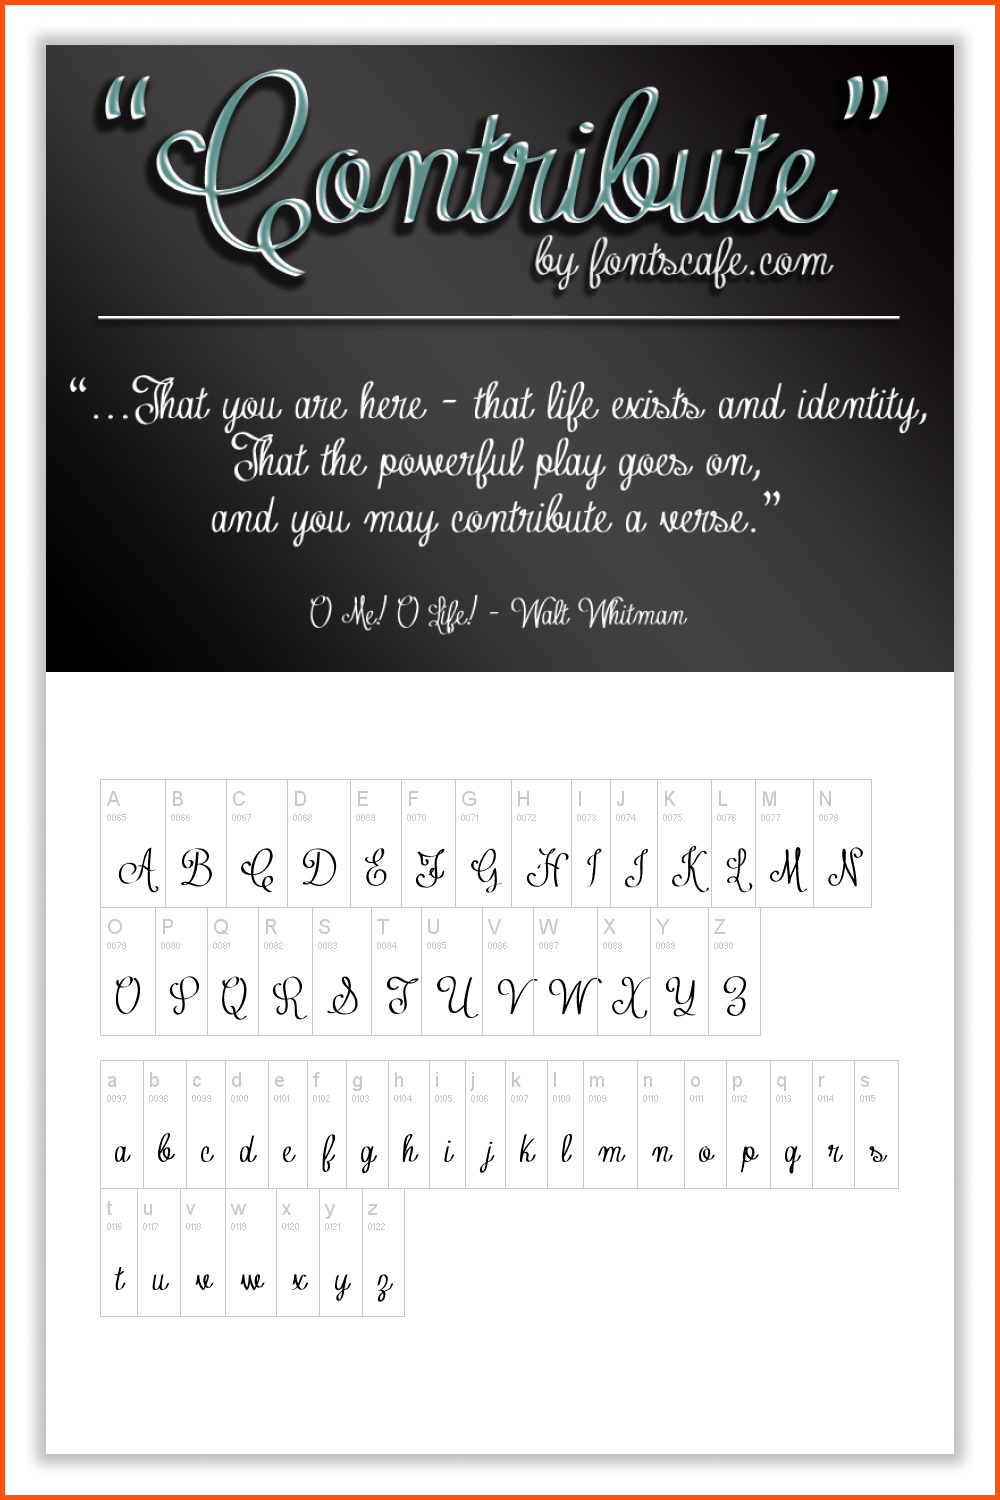 Alphabet from beautiful, calligraphic letters on a black and white background.